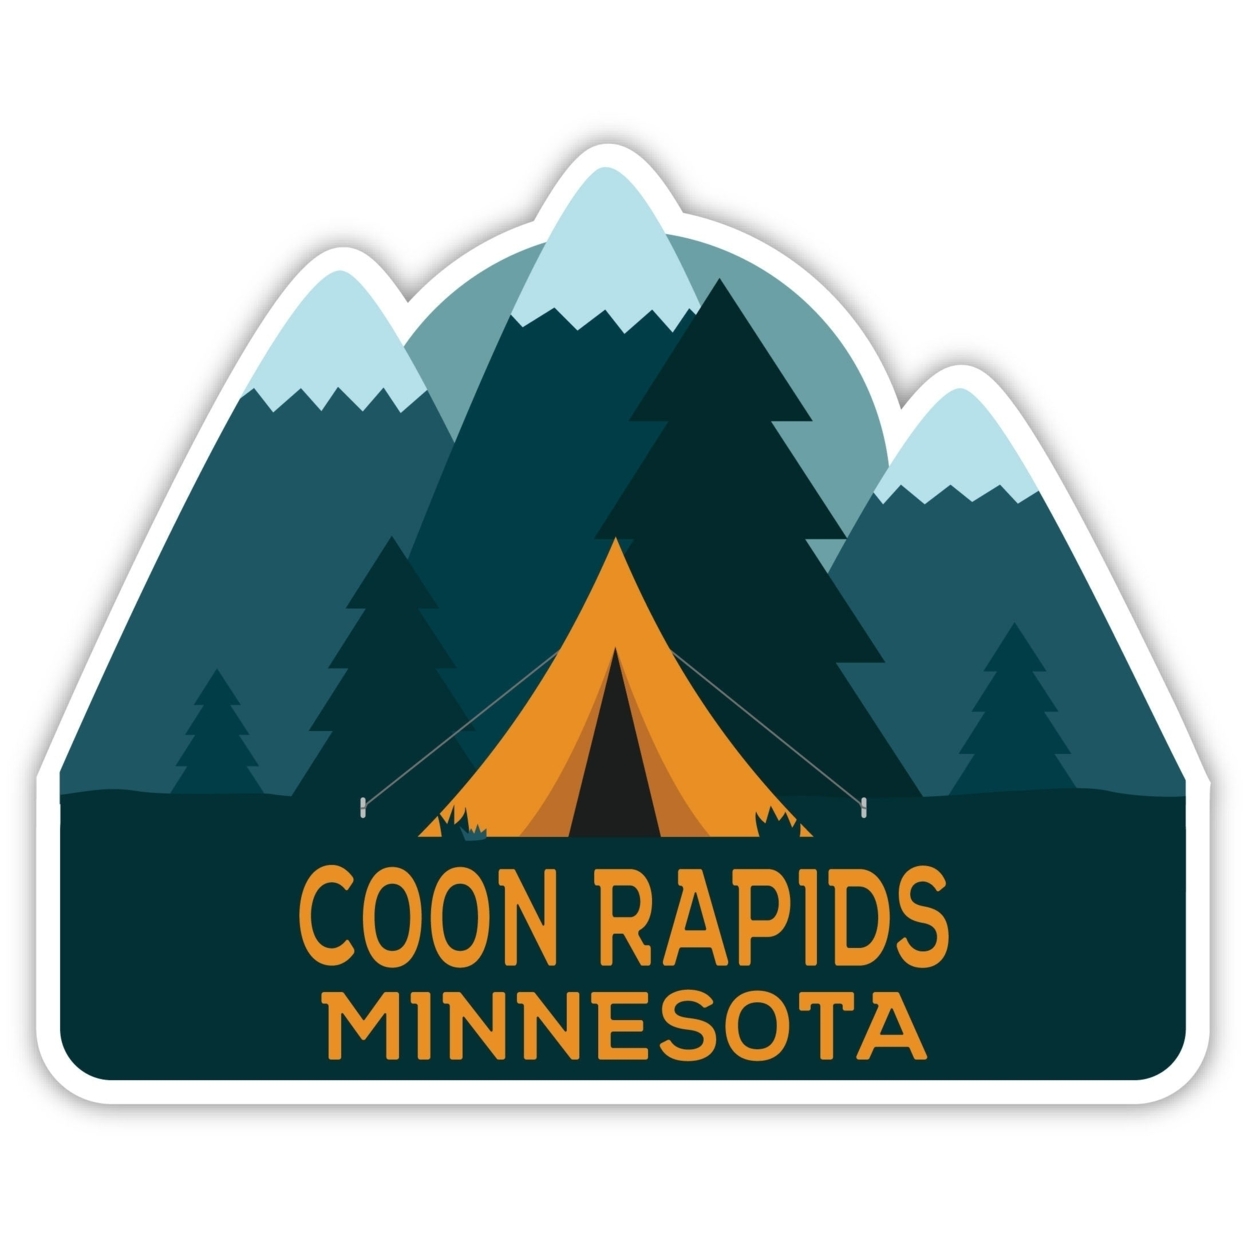 Coon Rapids Minnesota Souvenir Decorative Stickers (Choose Theme And Size) - 4-Pack, 12-Inch, Bear